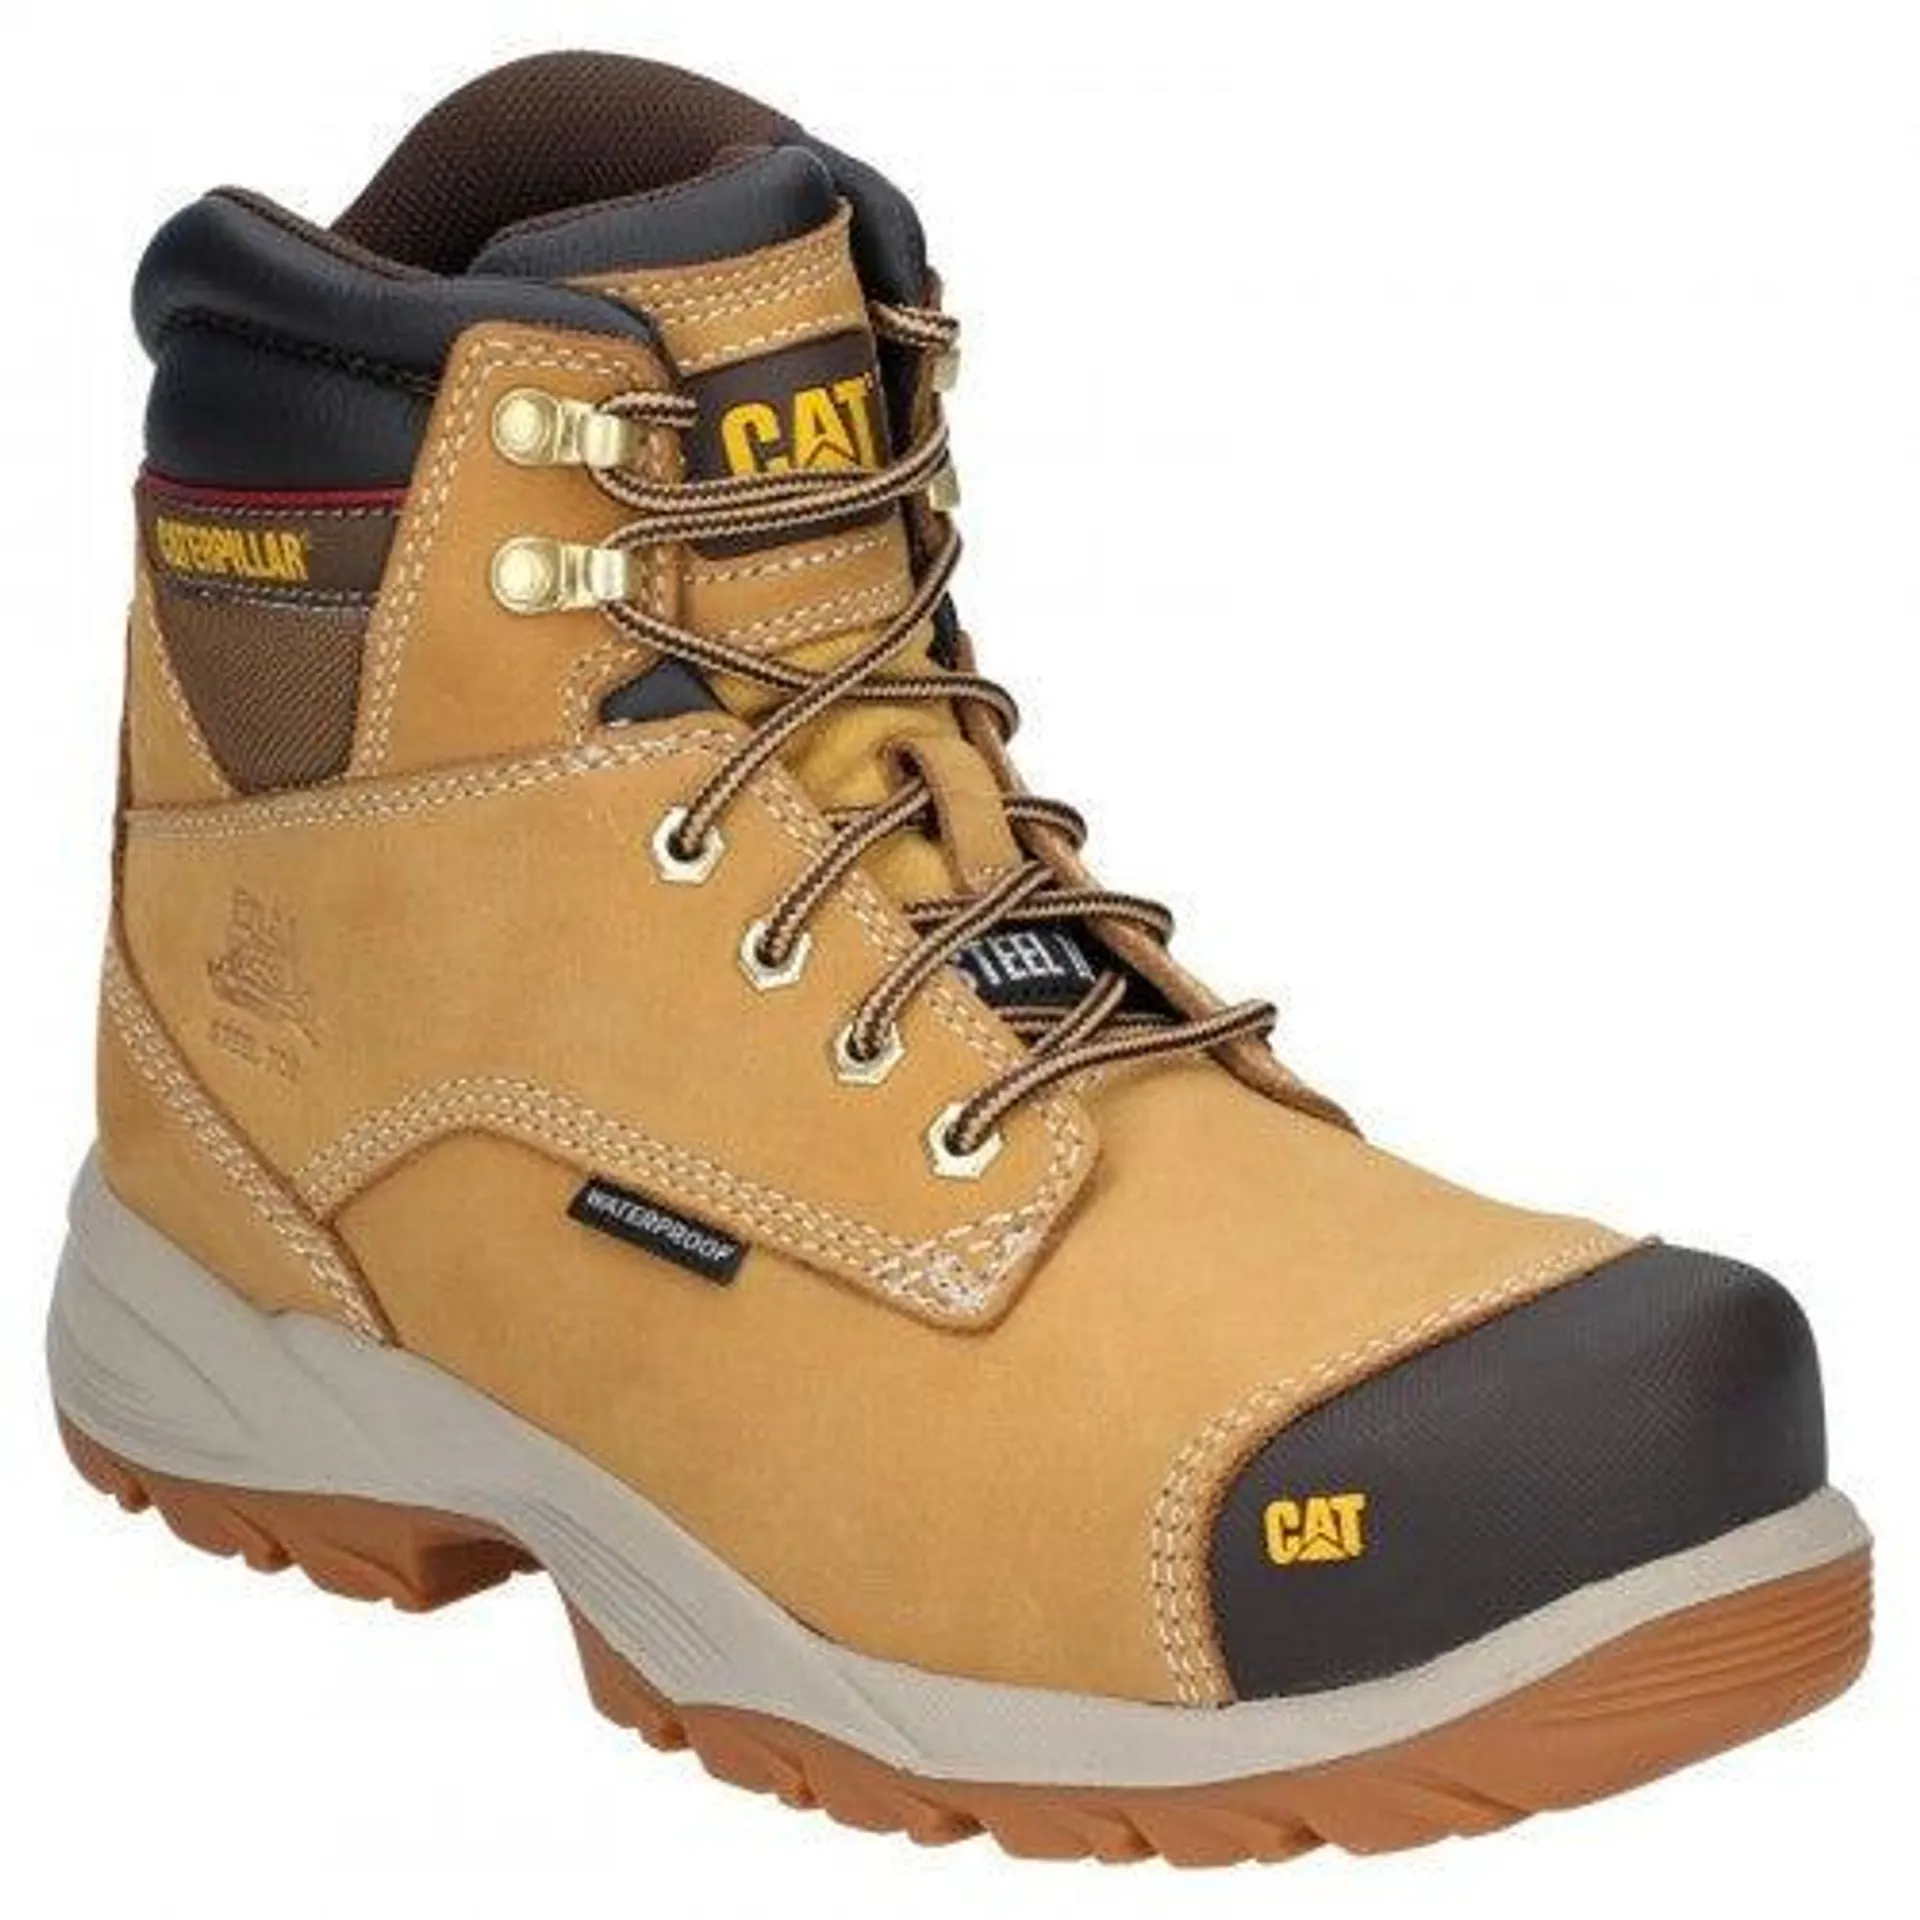 Caterpillar Mens Spiro Lace Up Waterproof Leather Safety Boot